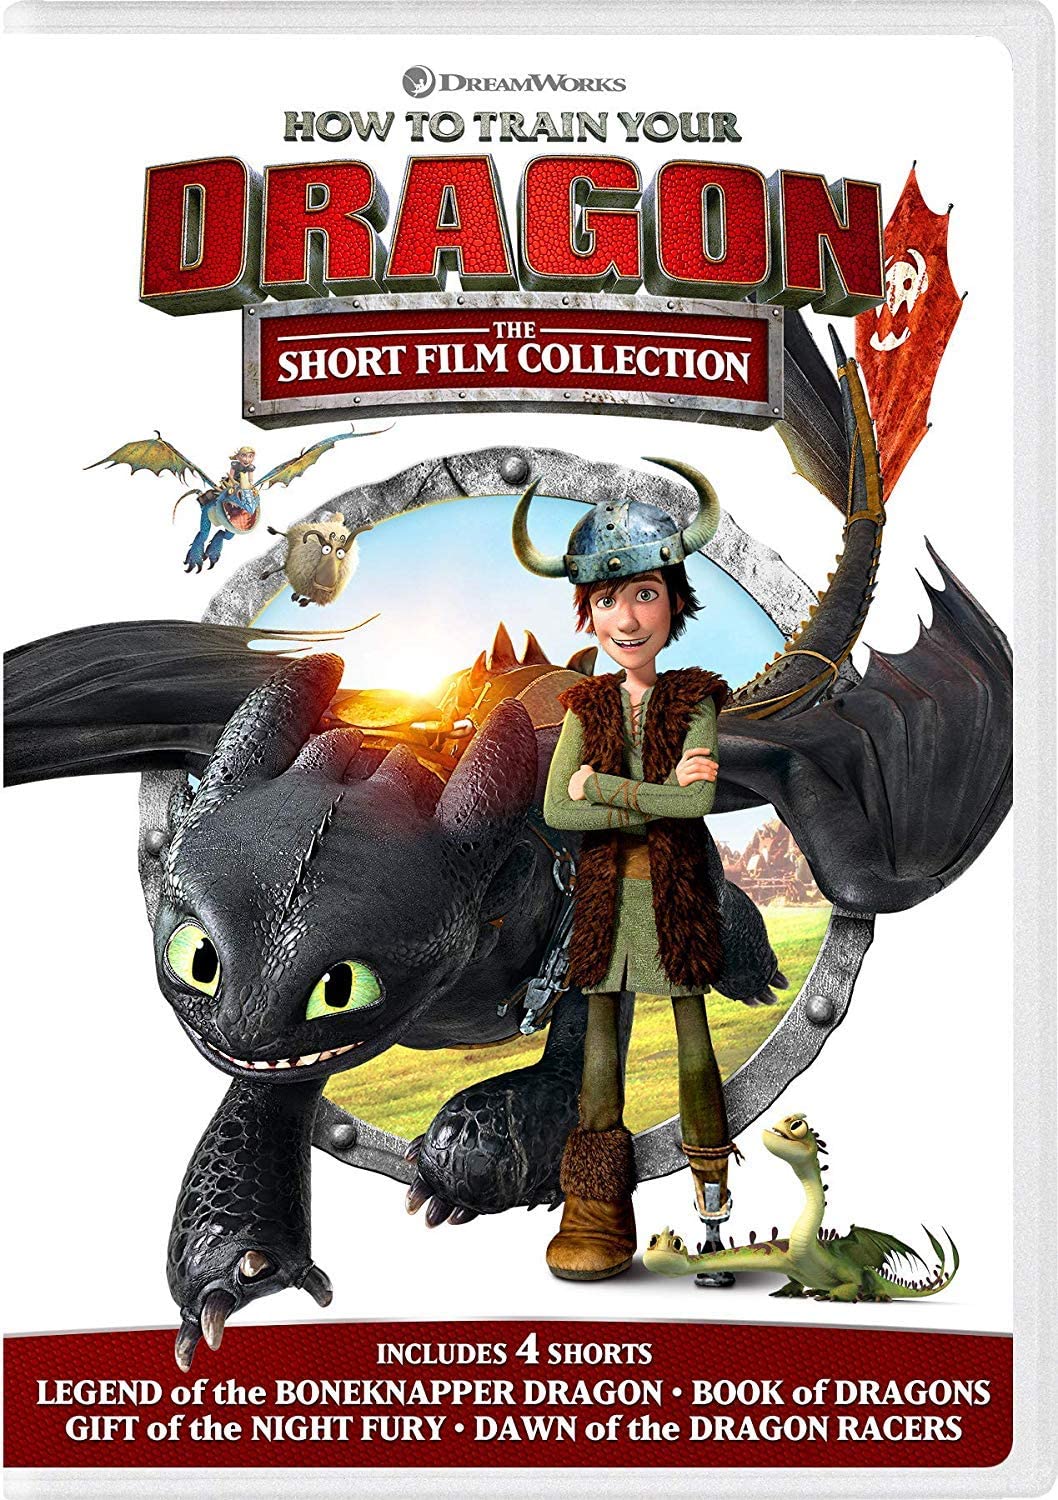 How to Train Your Dragon: The Short Film Collection (Dreamworks) (DVD)